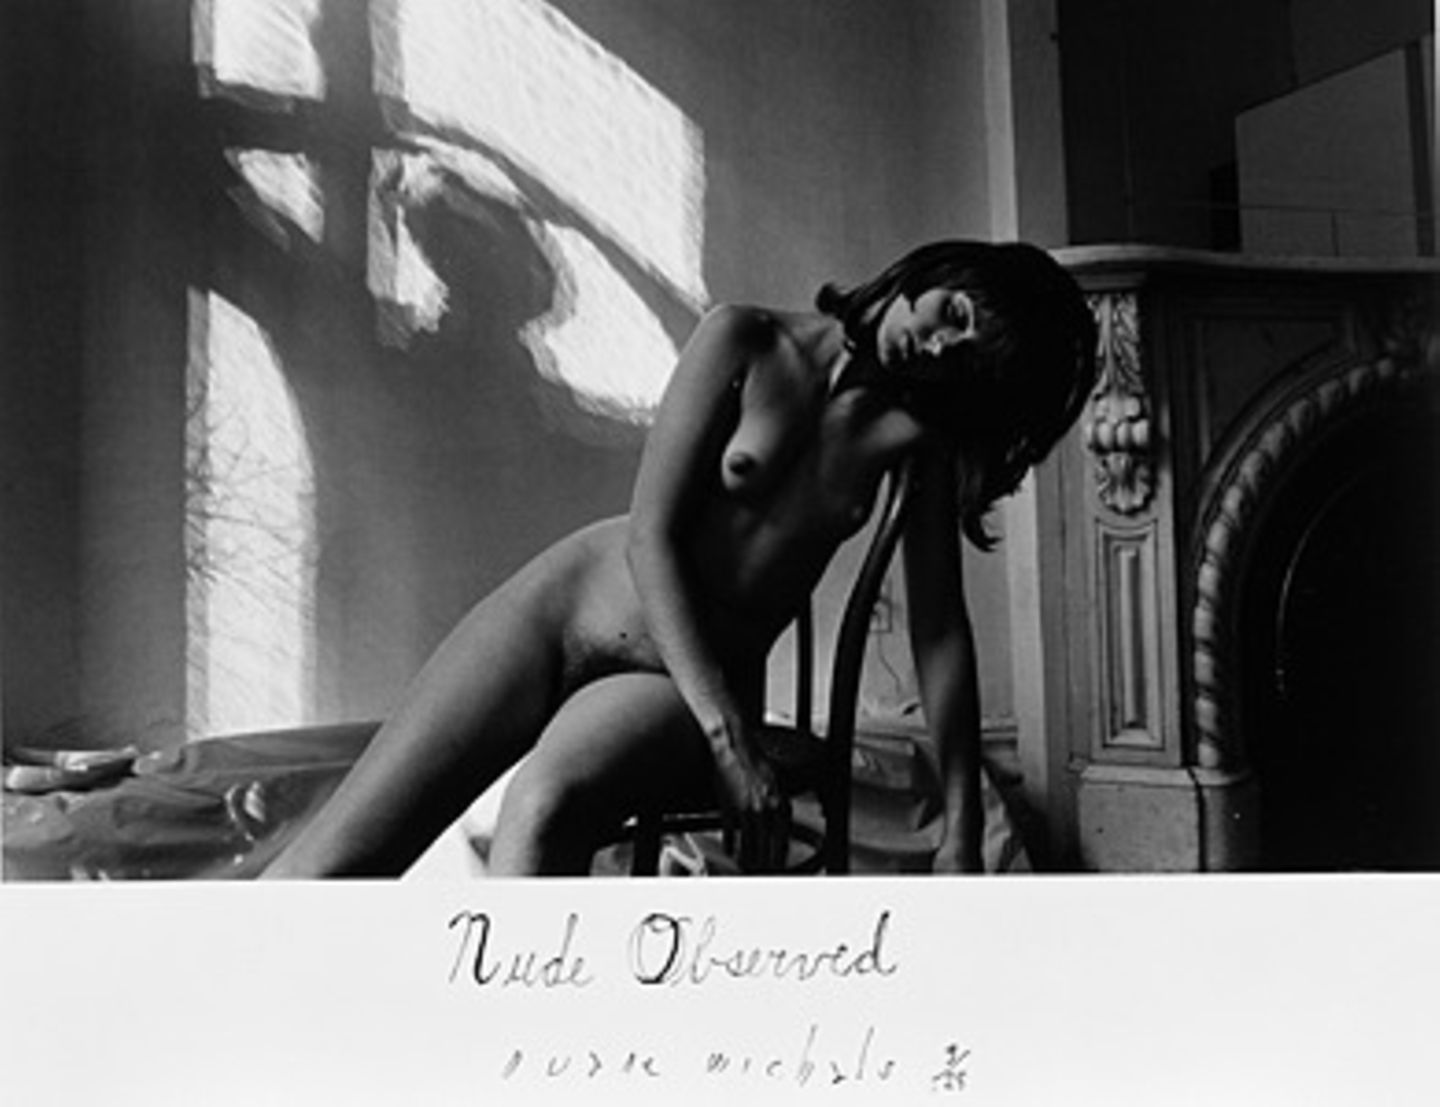 Duane Michals: Nude Observed (1968)